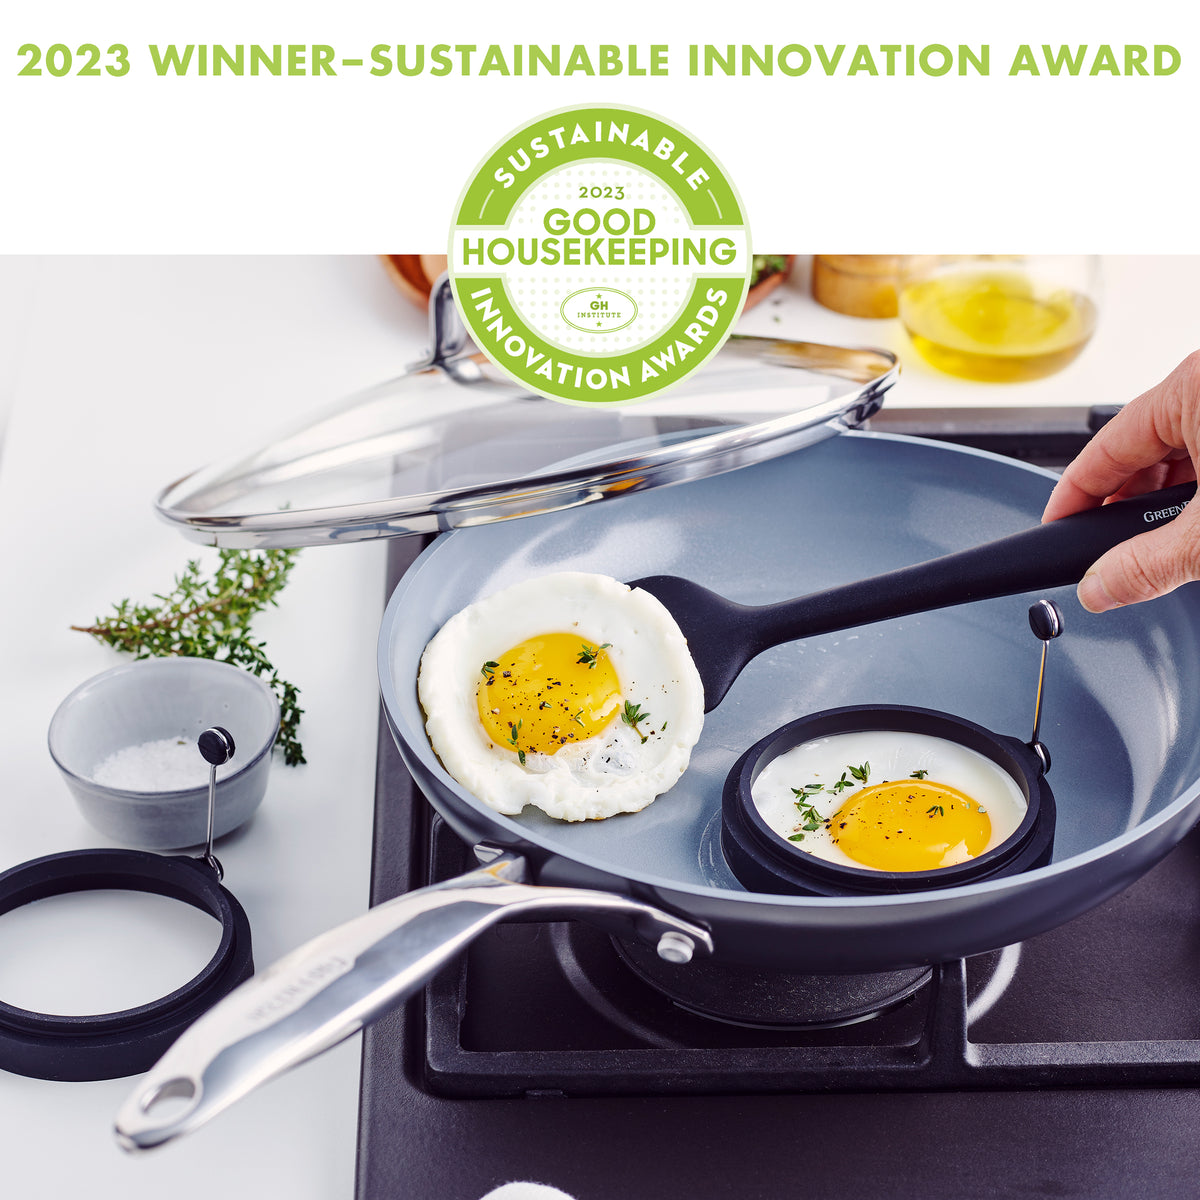 Modern Innovations Stainless Steel Egg Poacher Pan Set with 4